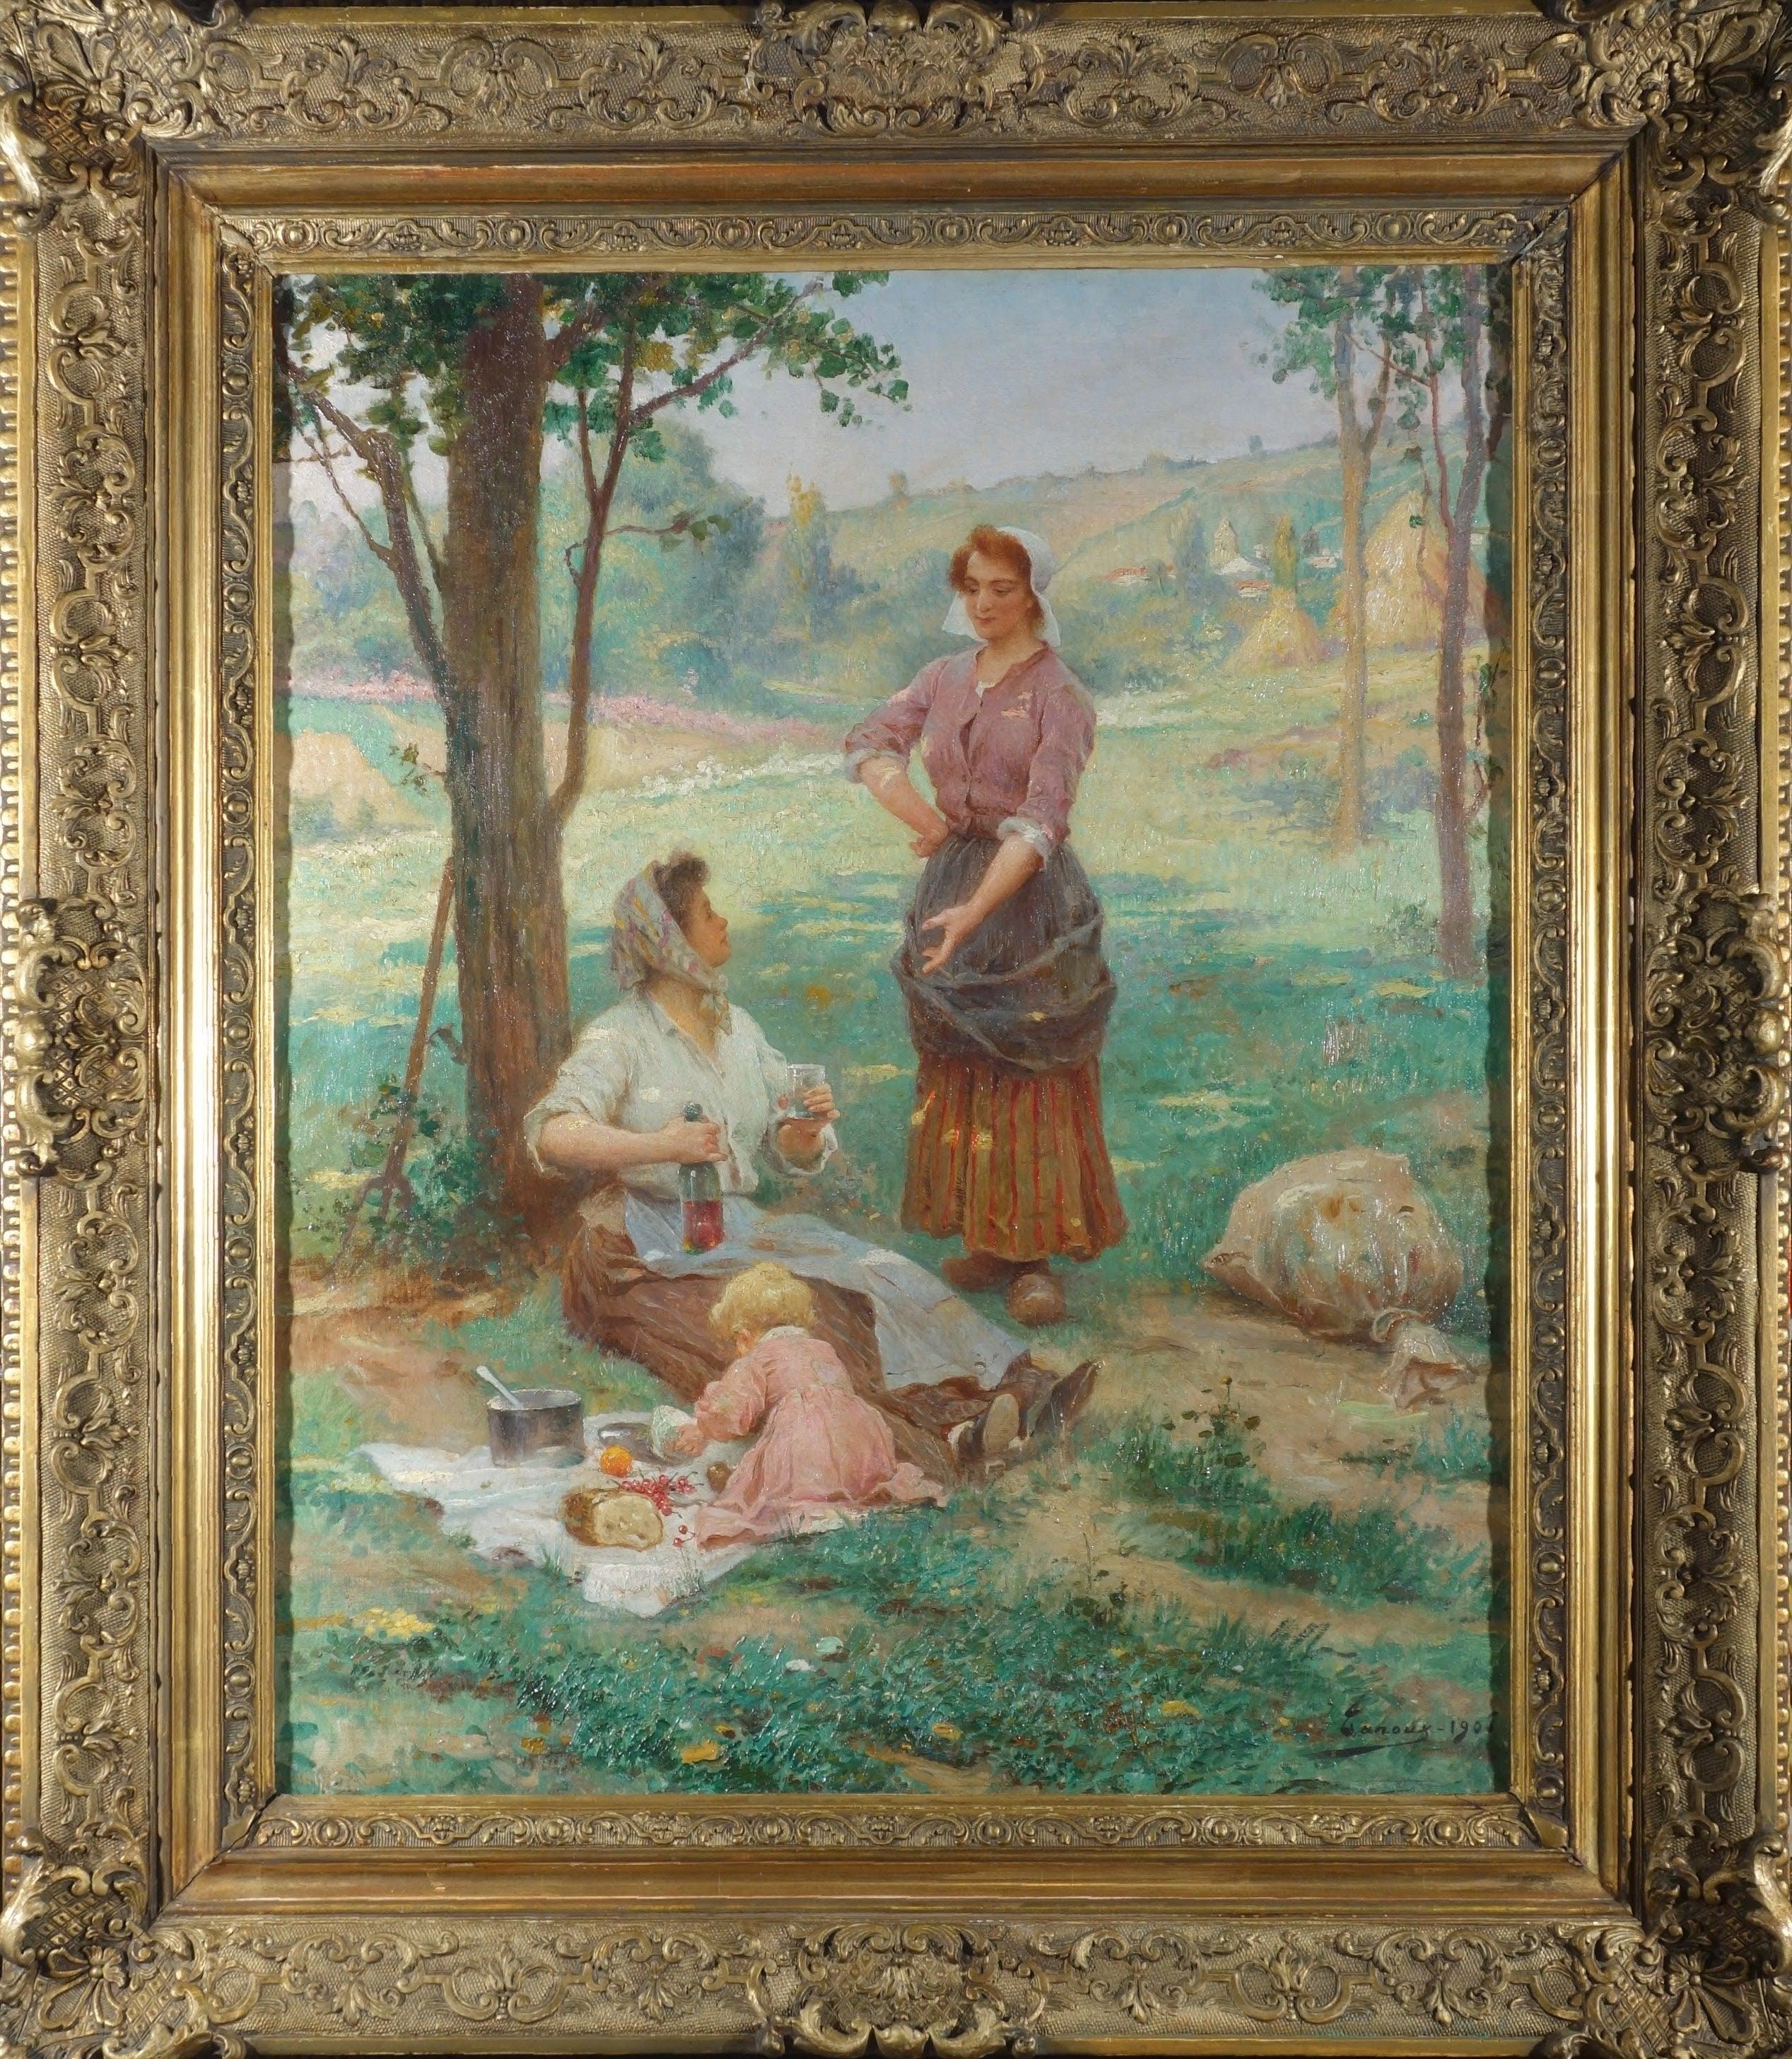 Adrien-Henri Tanoux Figurative Painting - Luncheon on the Grass, French artist, signed and dated by Tanoux